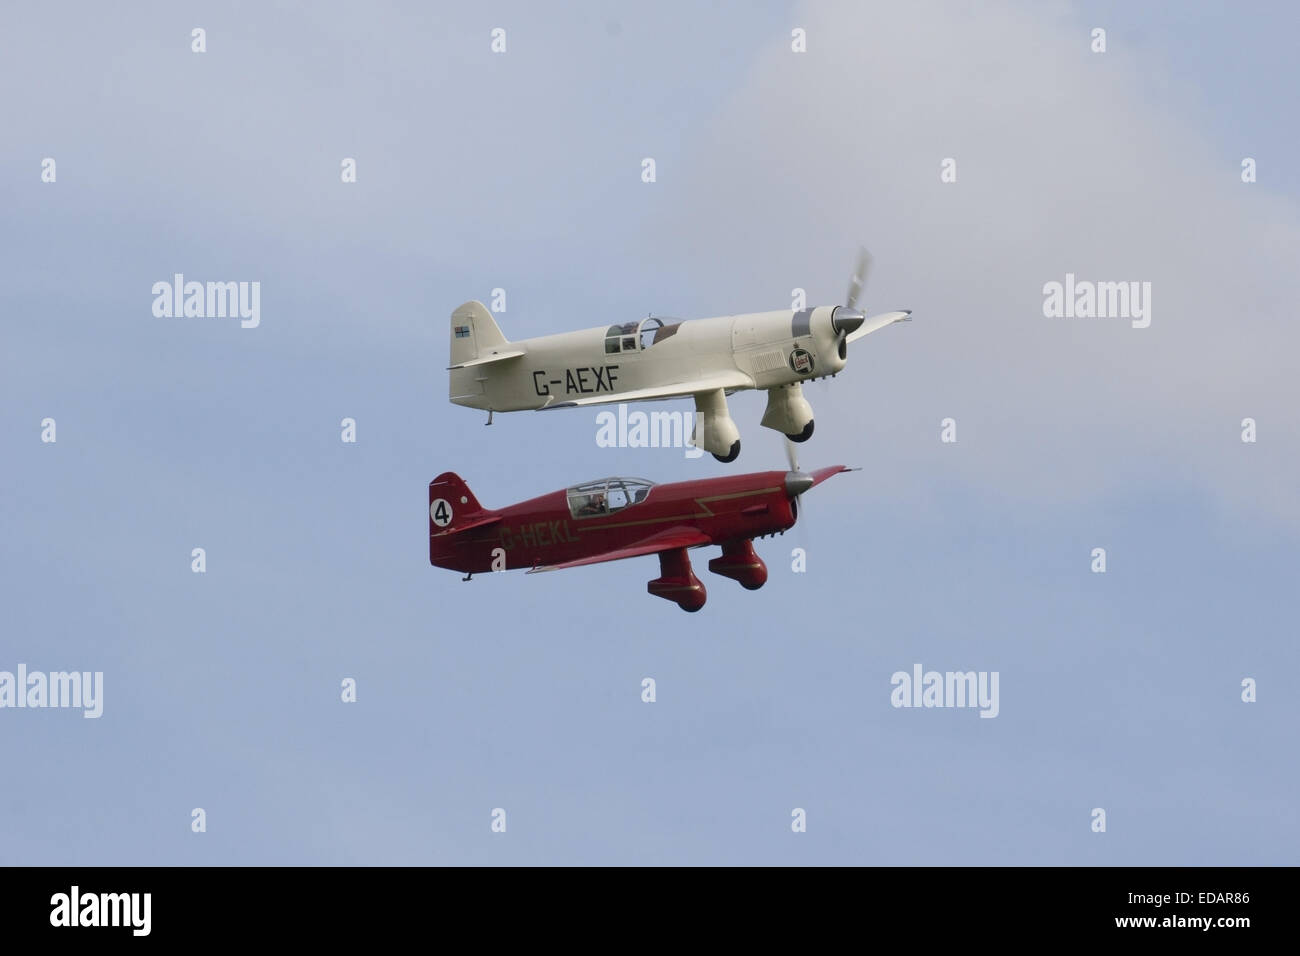 Two Percival Mew Gulls participating in an air race Stock Photo